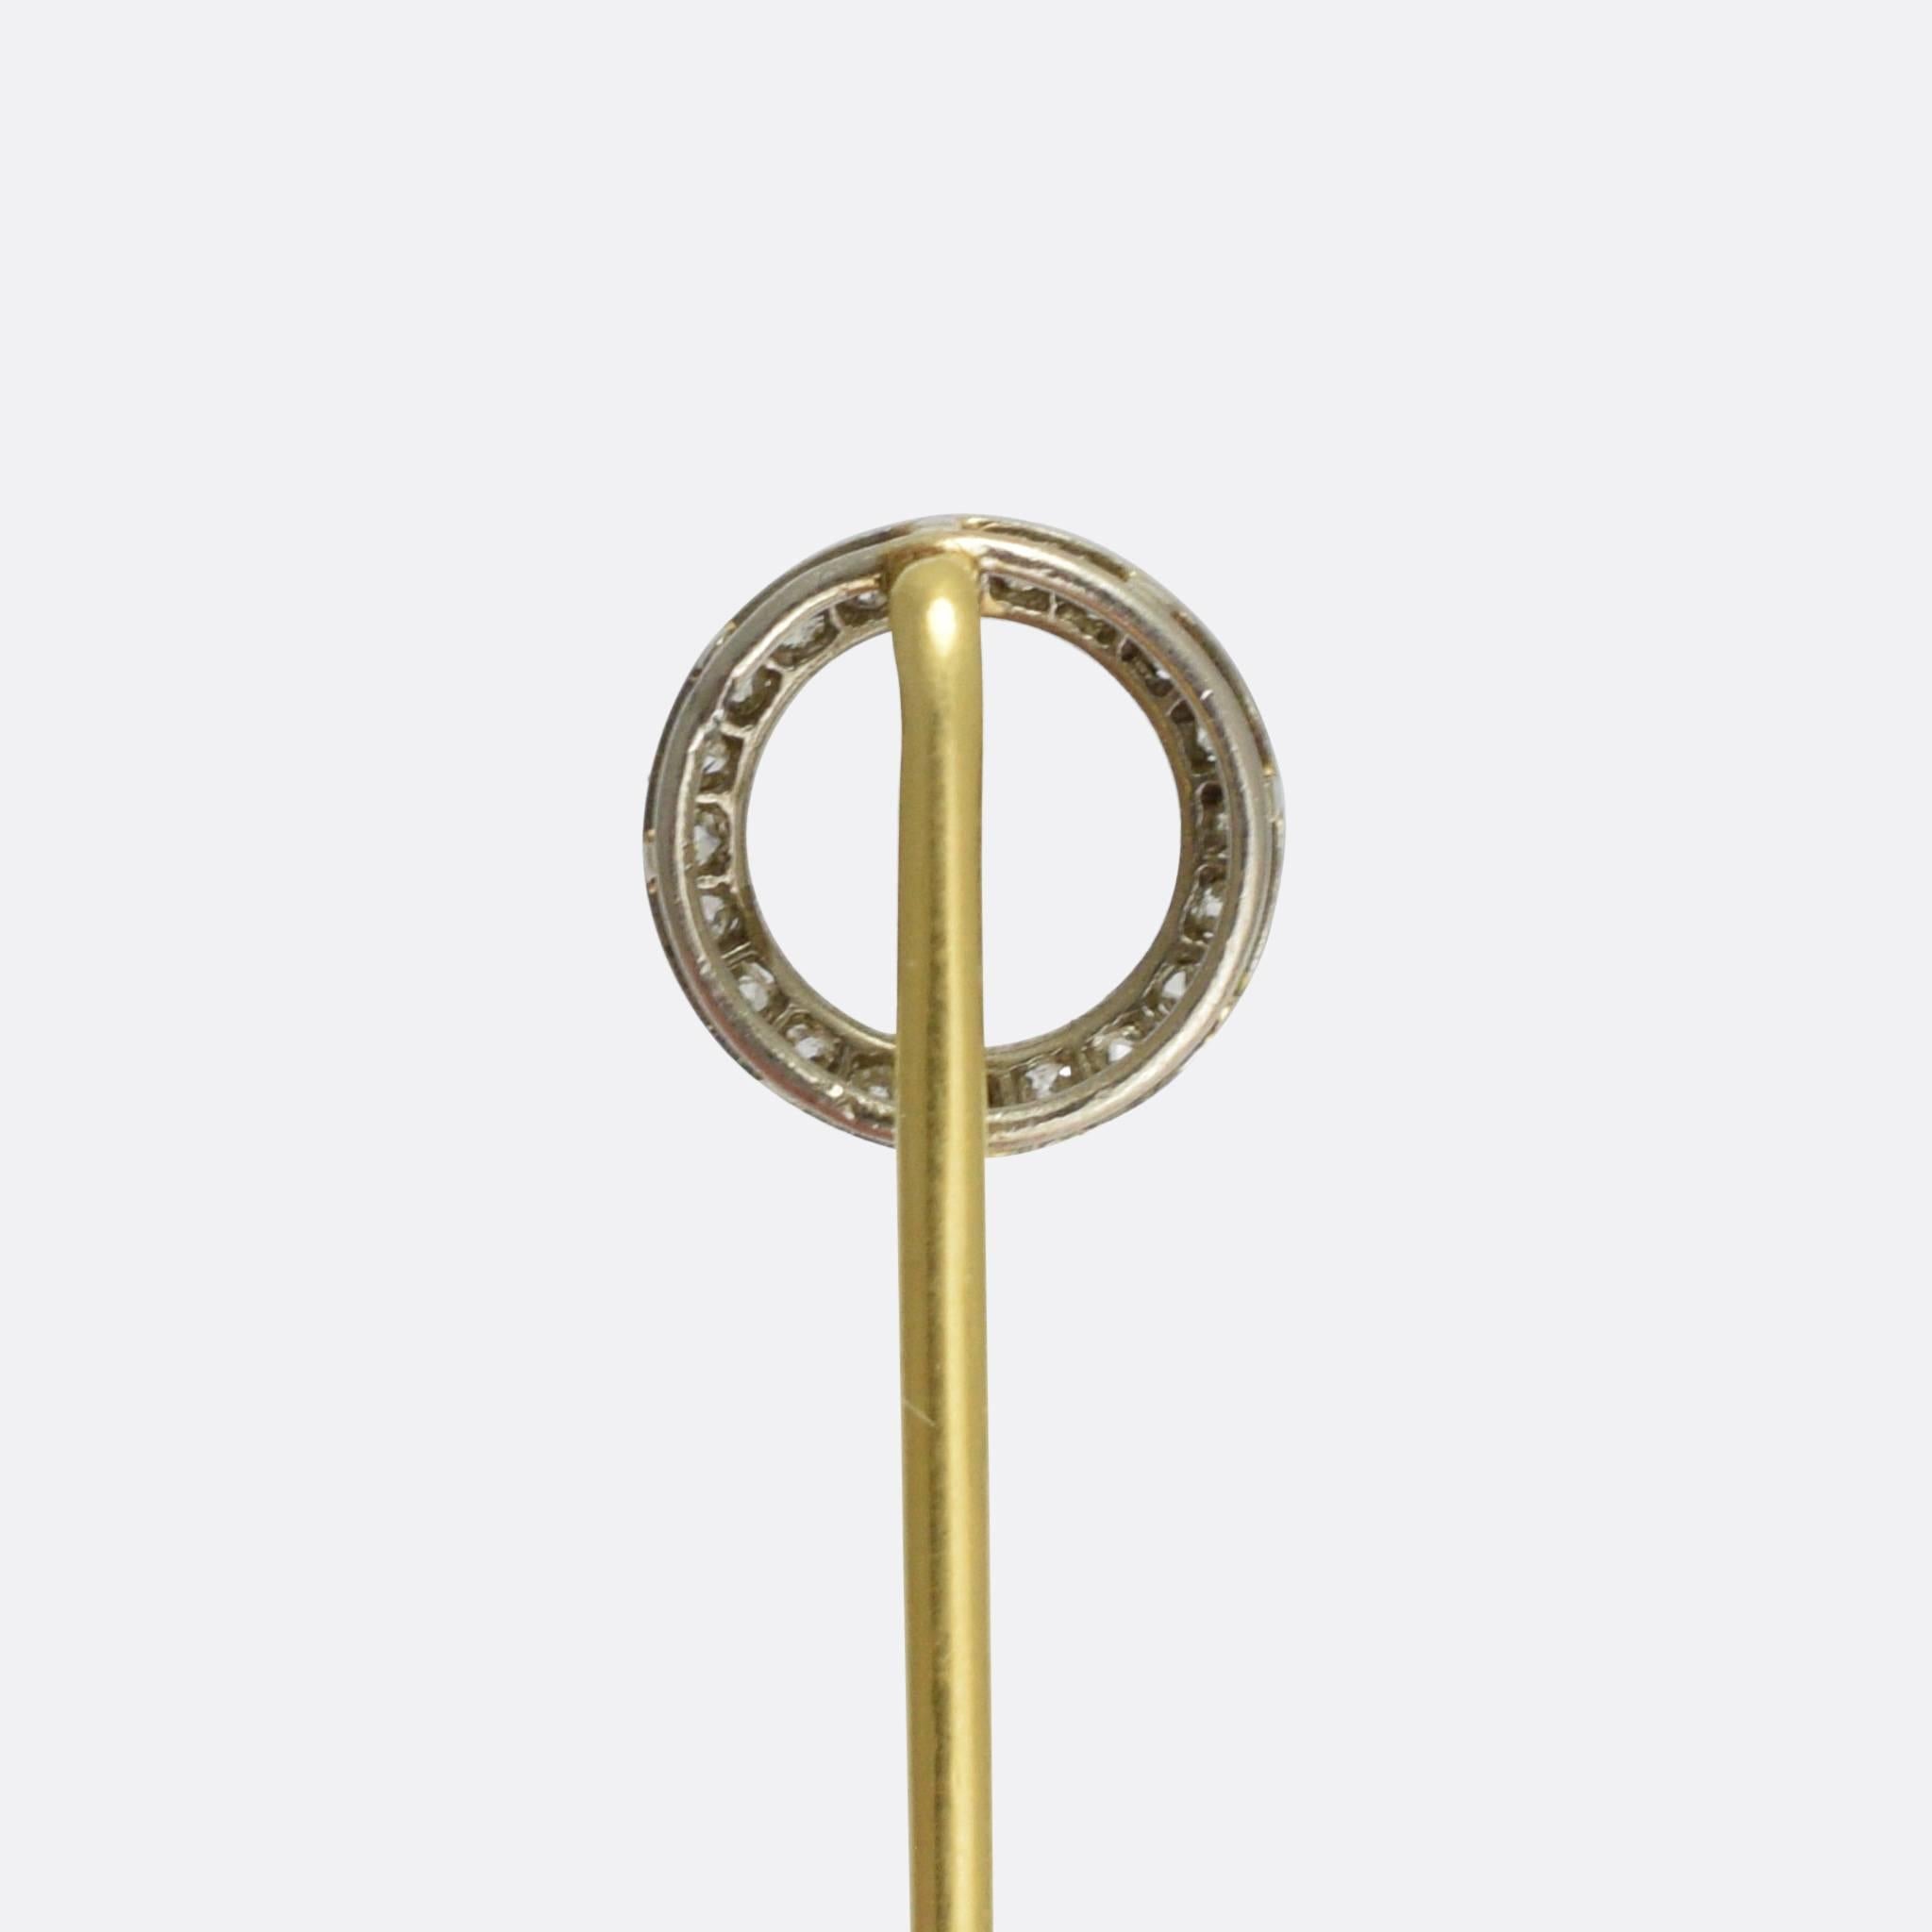 A stylish Art Deco era stick pin, the head modelled as a halo. It's set with rose cut diamonds, and finished in millegrain platinum. 

STONES
Rose cut diamonds

MEASUREMENTS
Length: 6.9cm
Head: 9.7mm

WEIGHT
1.6g

MARKS
No marks present, tests as